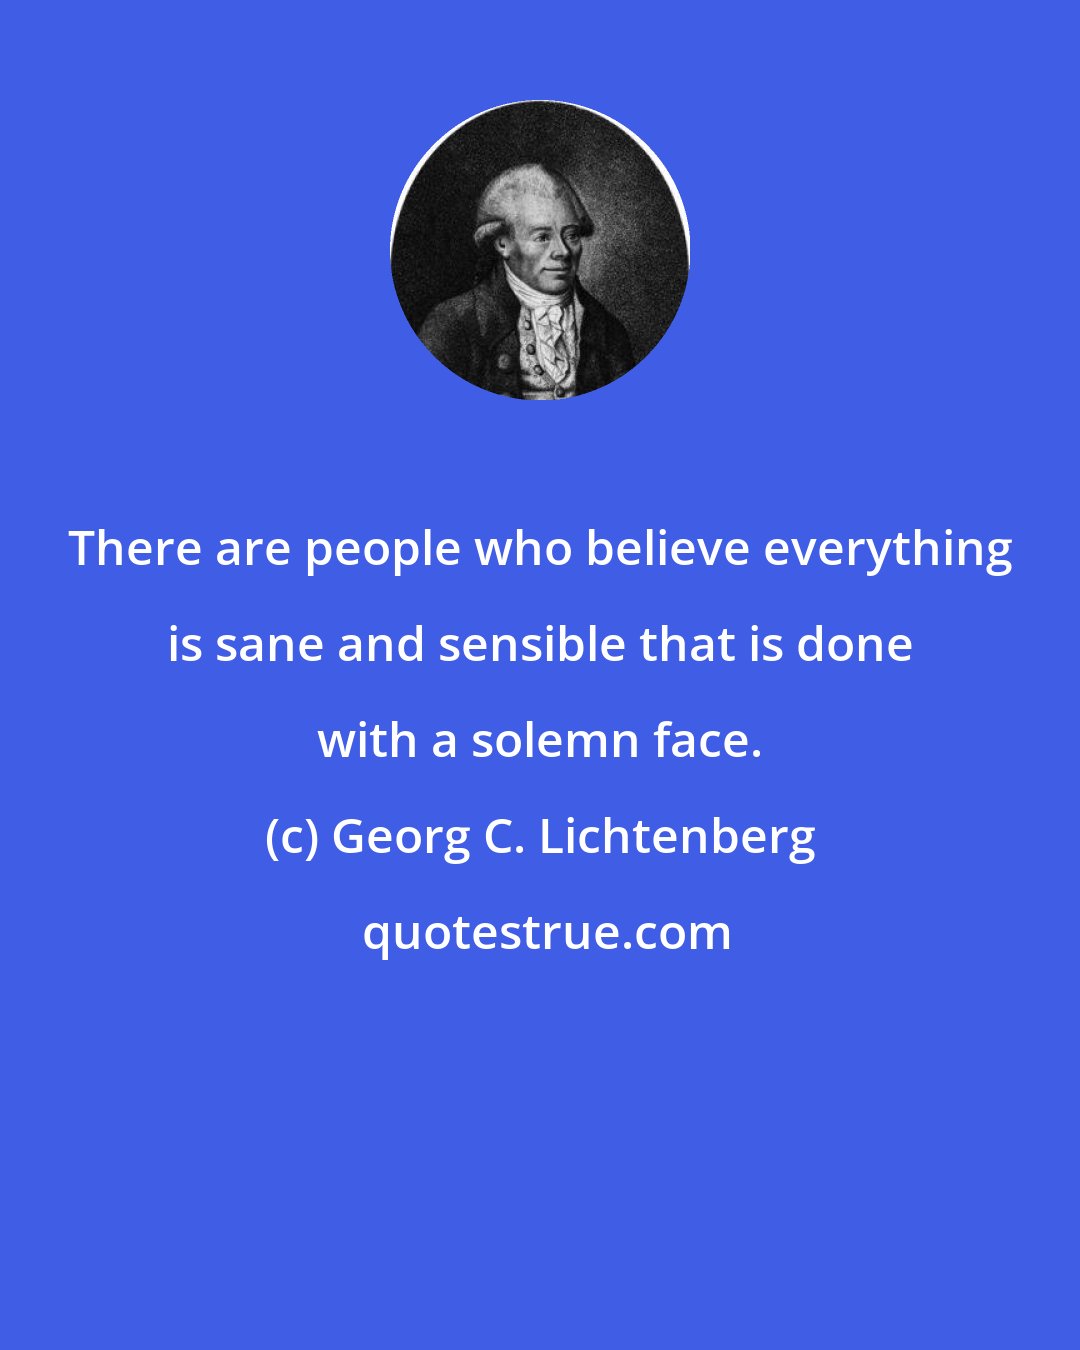 Georg C. Lichtenberg: There are people who believe everything is sane and sensible that is done with a solemn face.